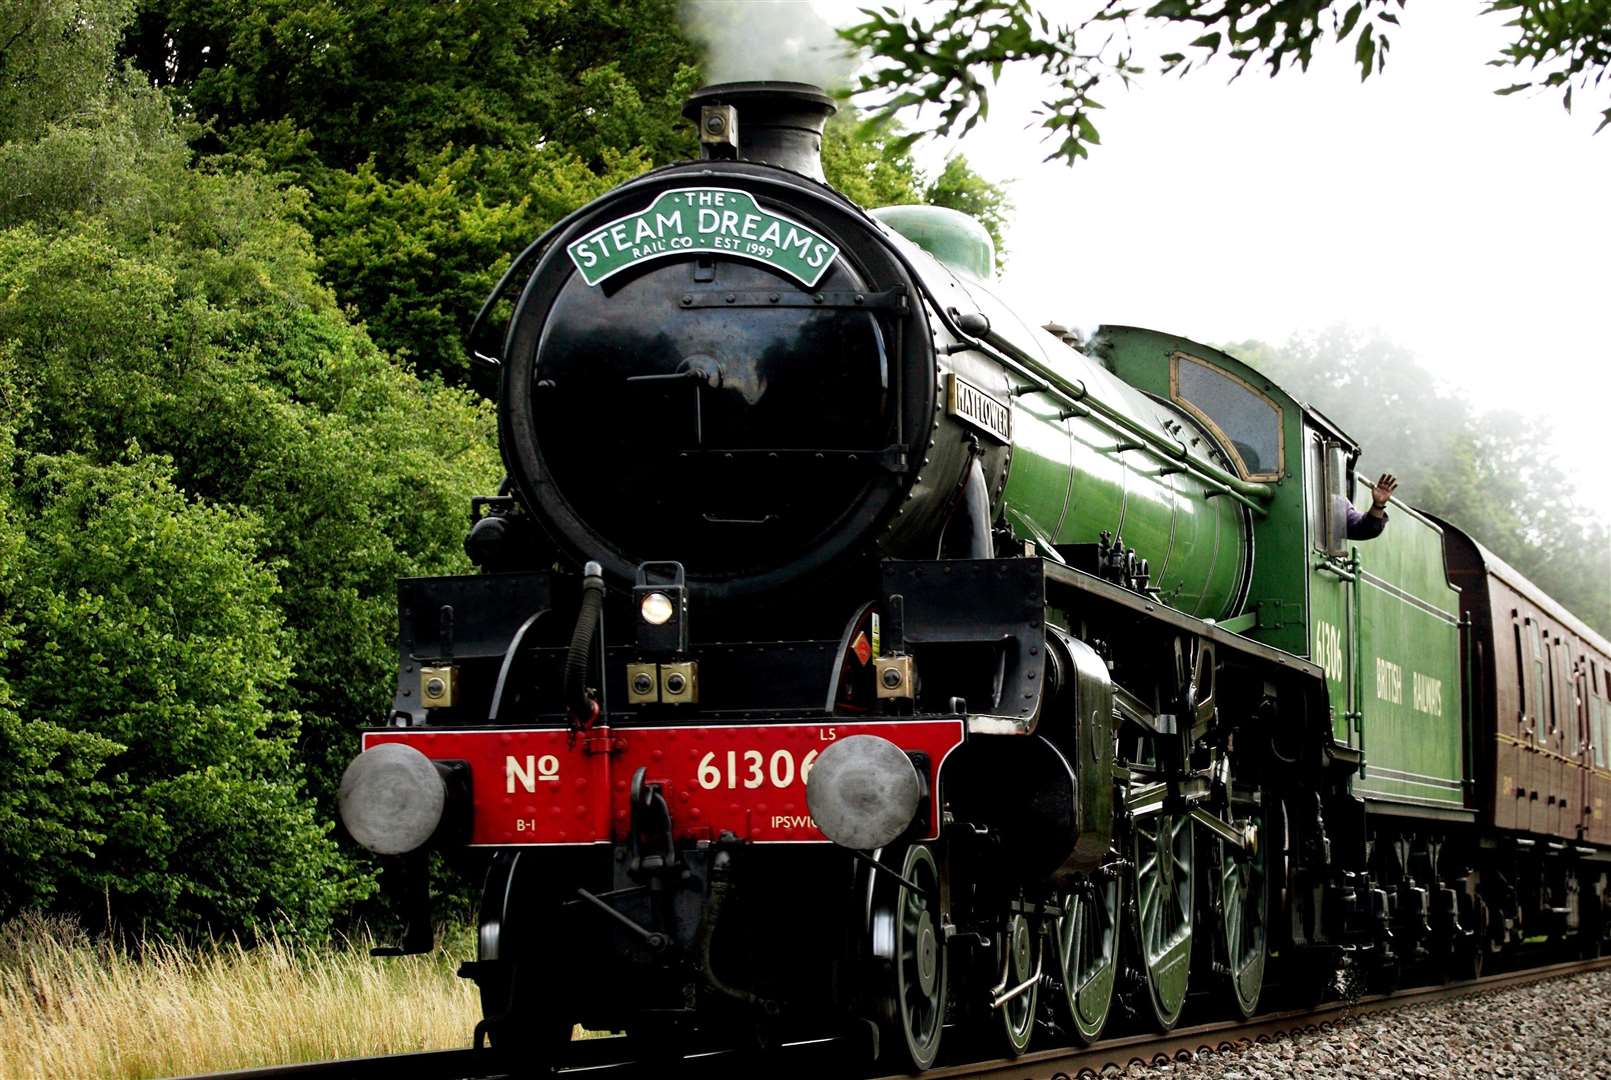 Special rail tours through Kent run through July and August. Picture: Steam Dreams